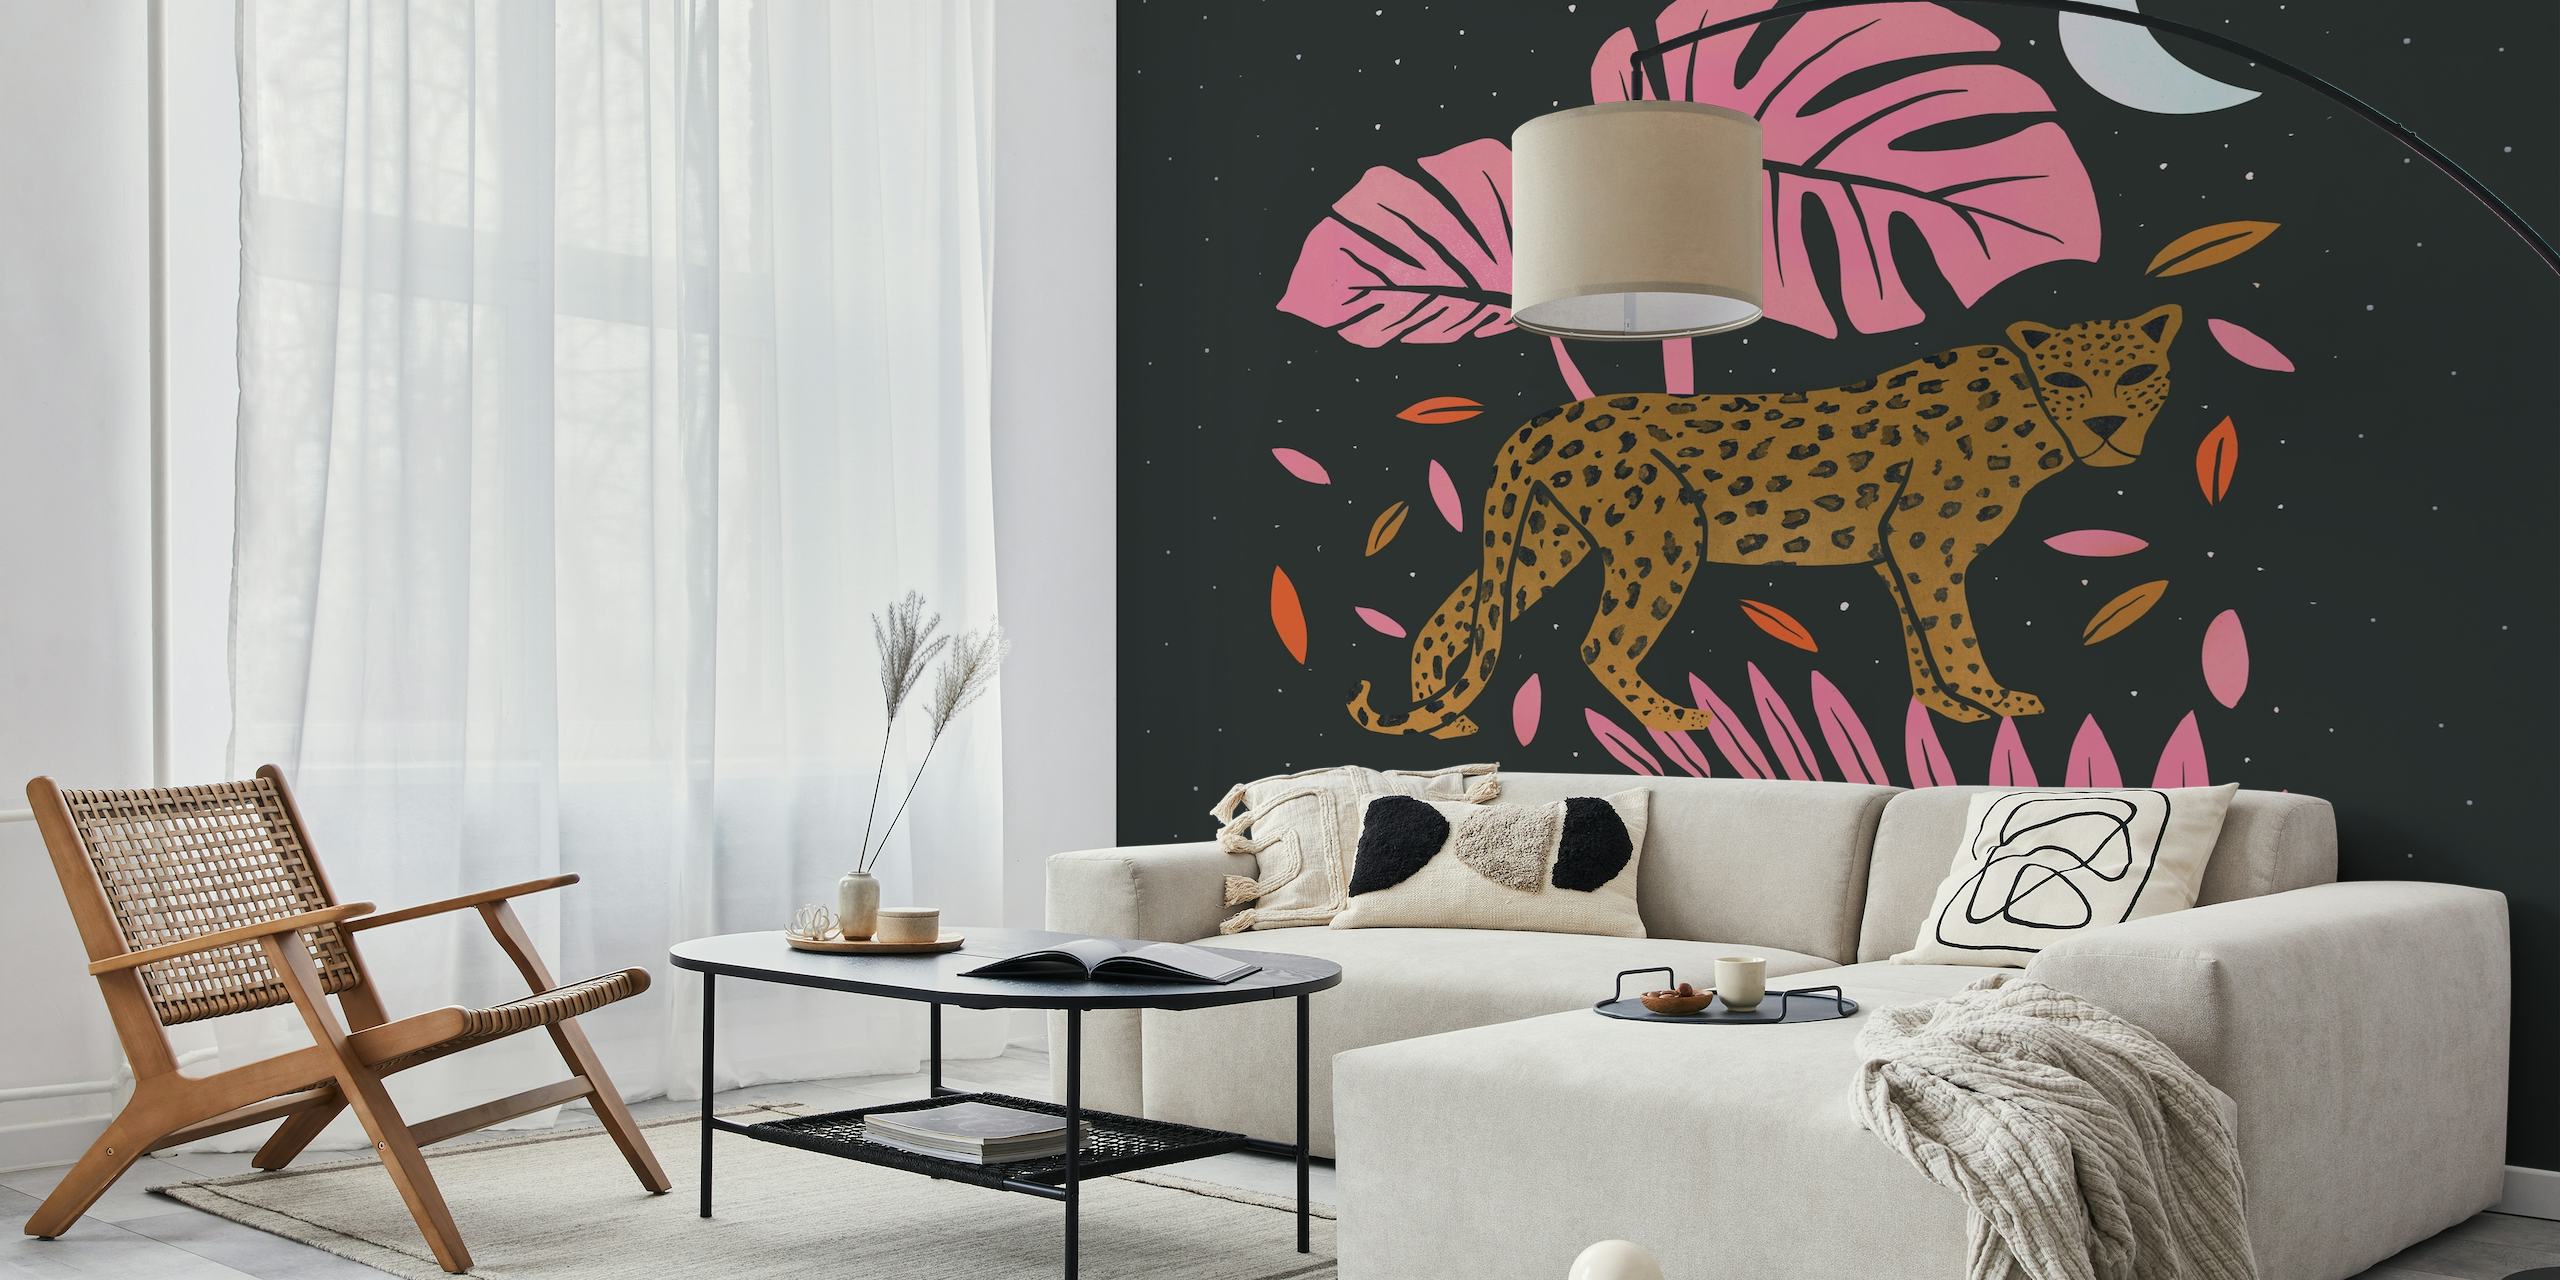 Leopard Black and Pink wall mural with a leopard amidst pink leaves and a moon on a starry night.